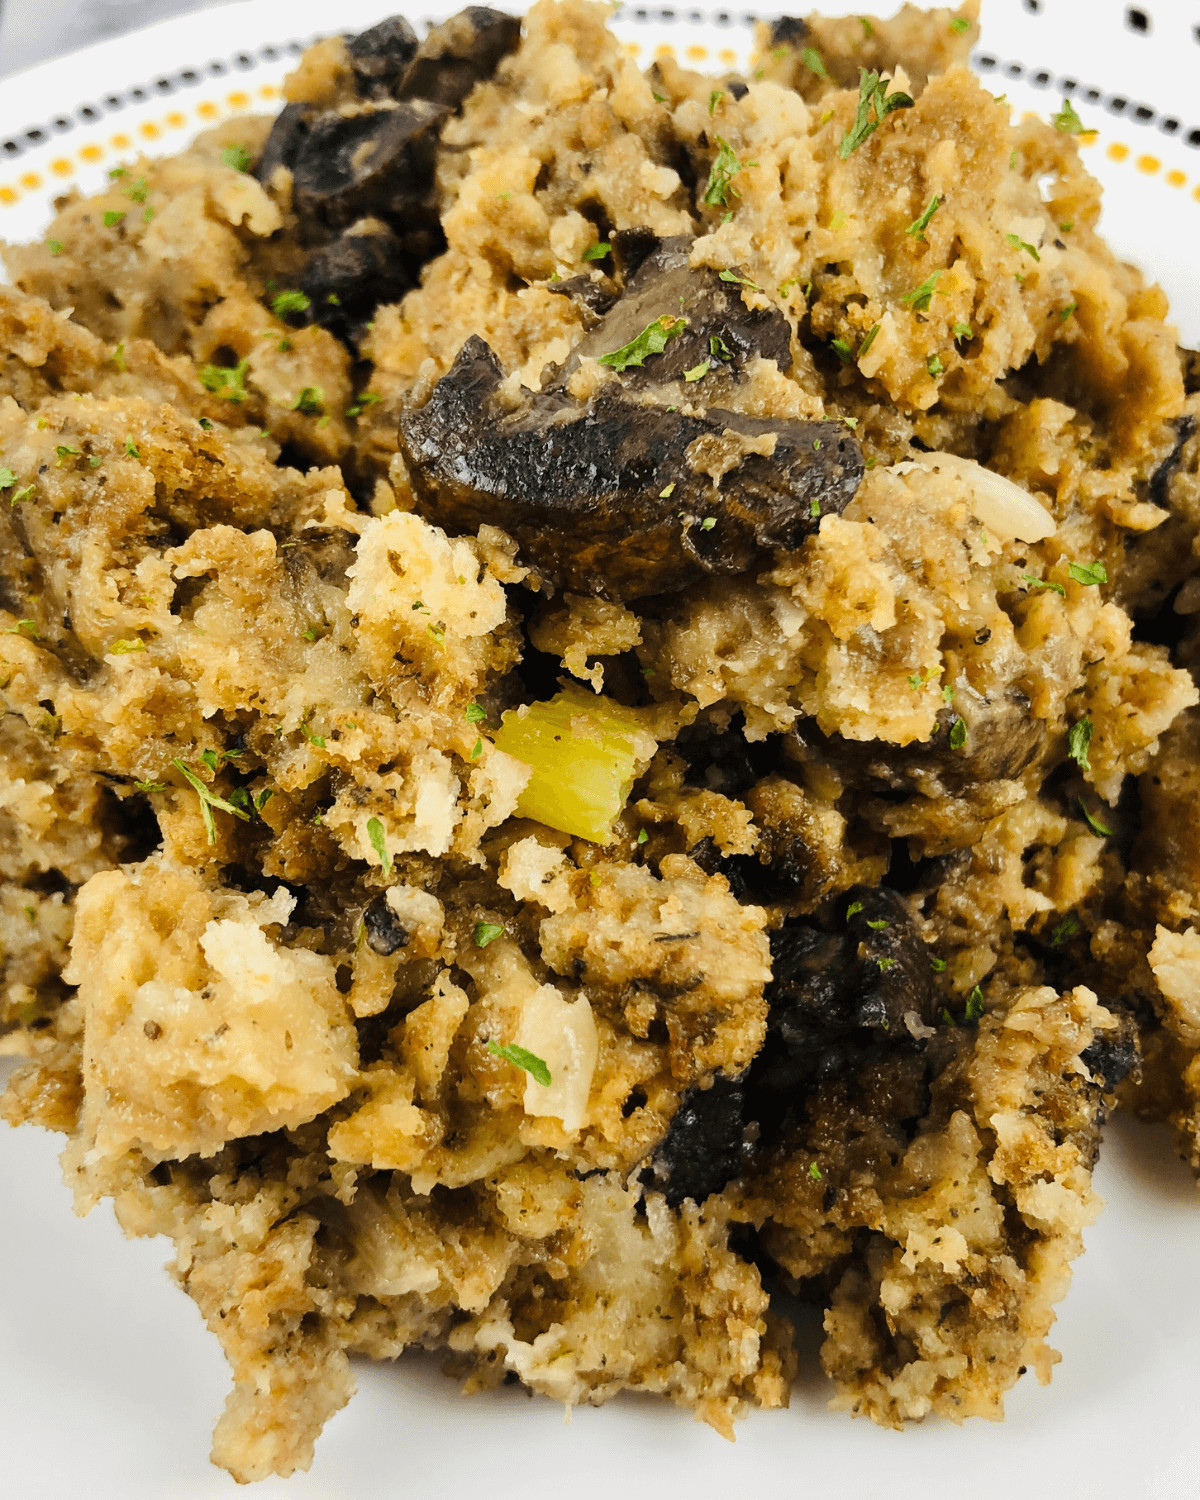 Slow cooker mushroom stuffing on a white plate.